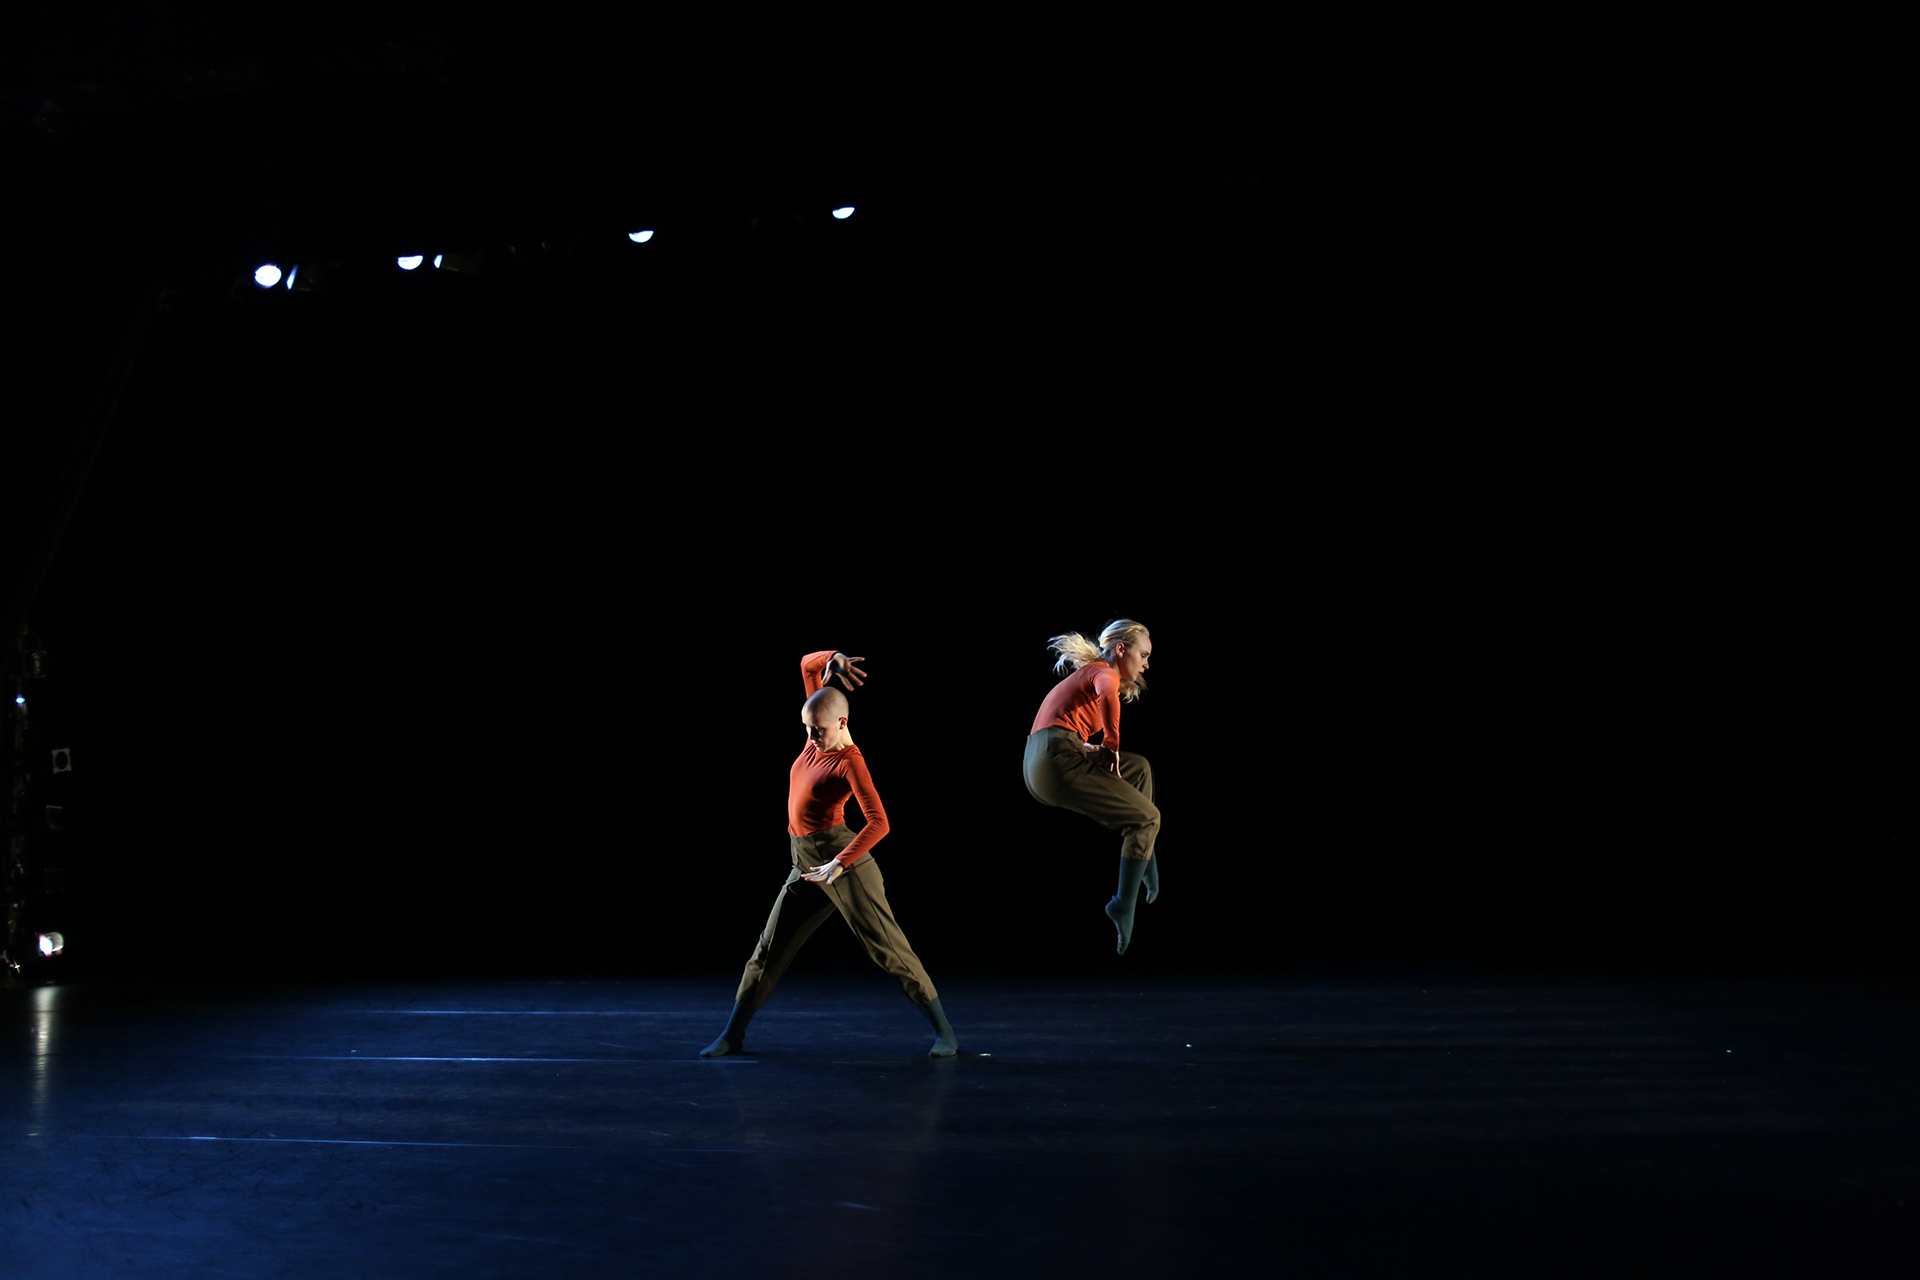 SADC 1 2018 "In Company" Choreographed by Yin-Yue Dance Company